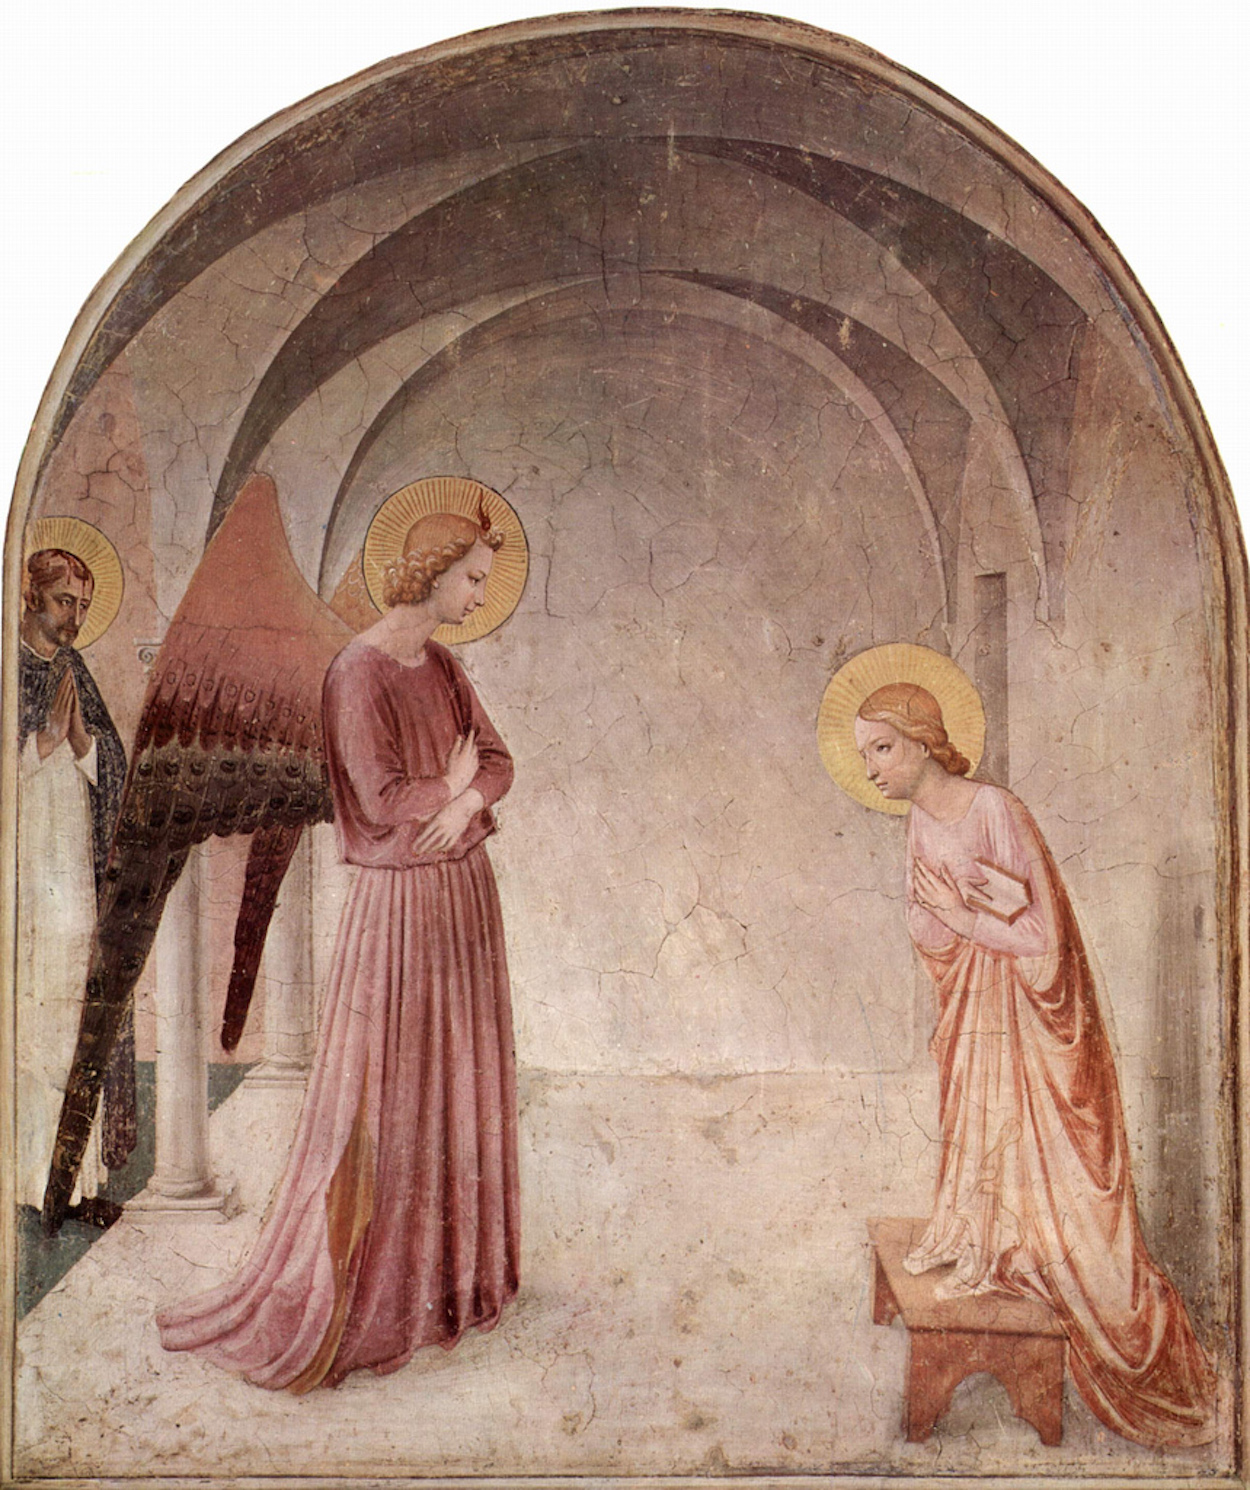 L'Annunciazione by Fra Angelico - c. 1441 - 176 x 148 cm 